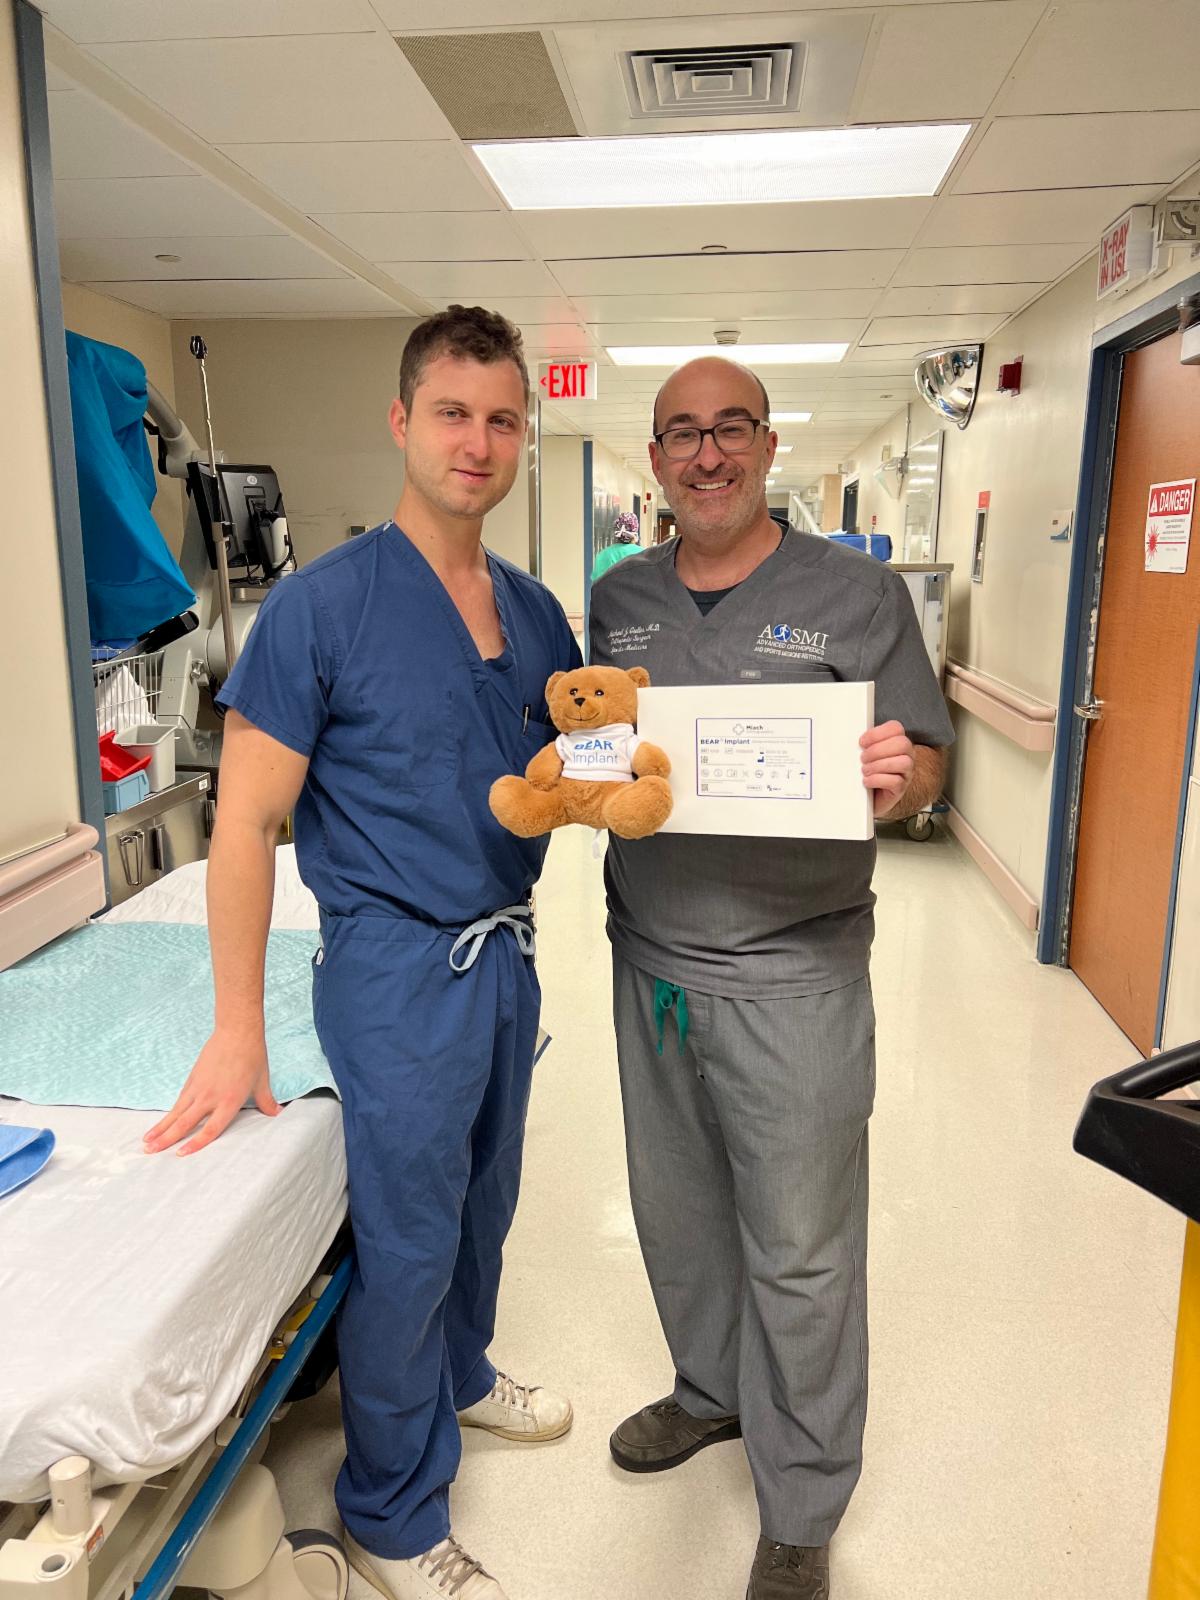 Michael J. Greller, MD, MBA, CPE, FAAOS and Garret L. Sobol, MD holding the BEAR Implant and the BEAR stuffed teddy bear mascot 